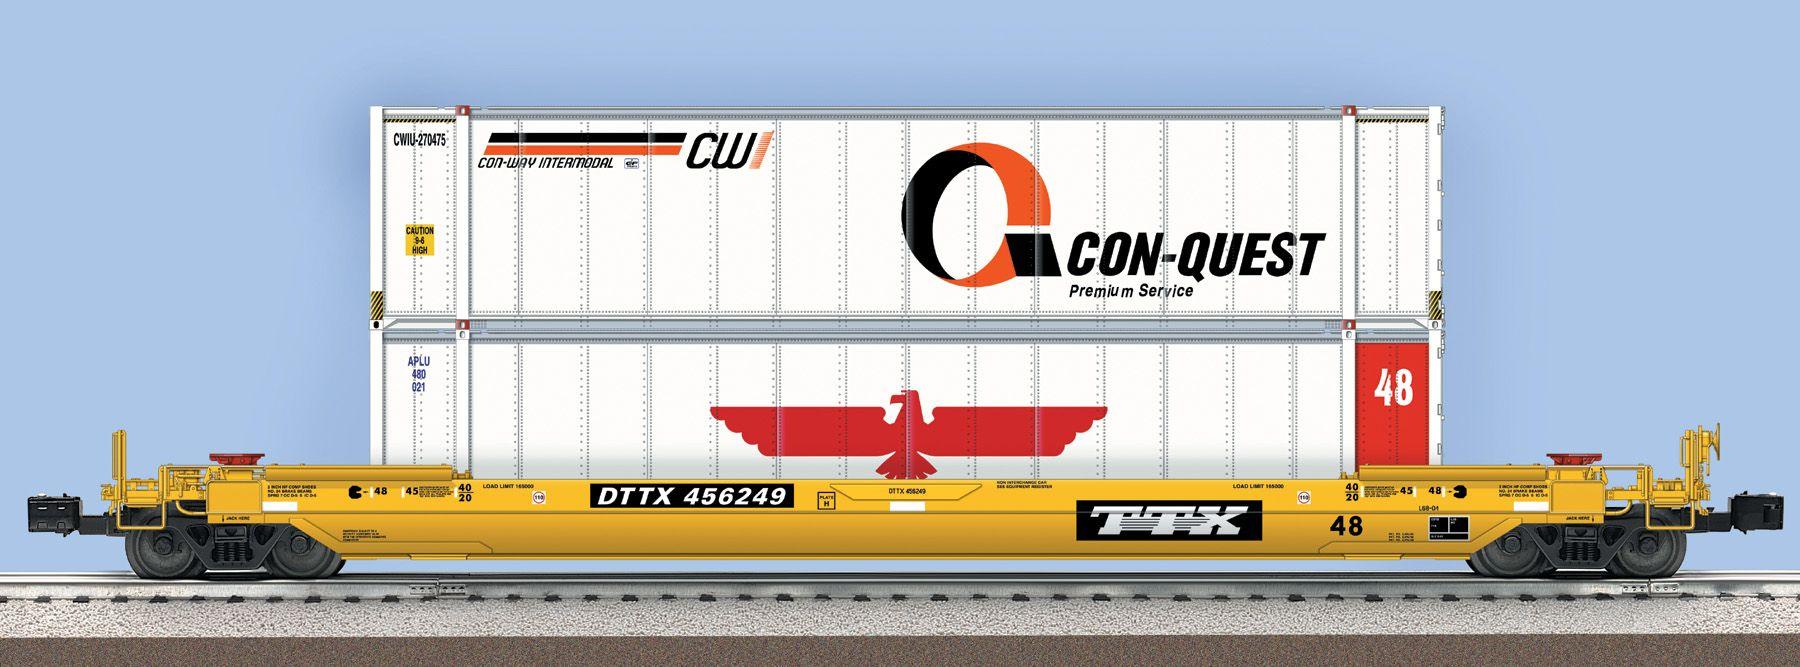 TTX Rail Logo - Freight Car Friday – The Many Faces of Trailer Train | Lionel Trains